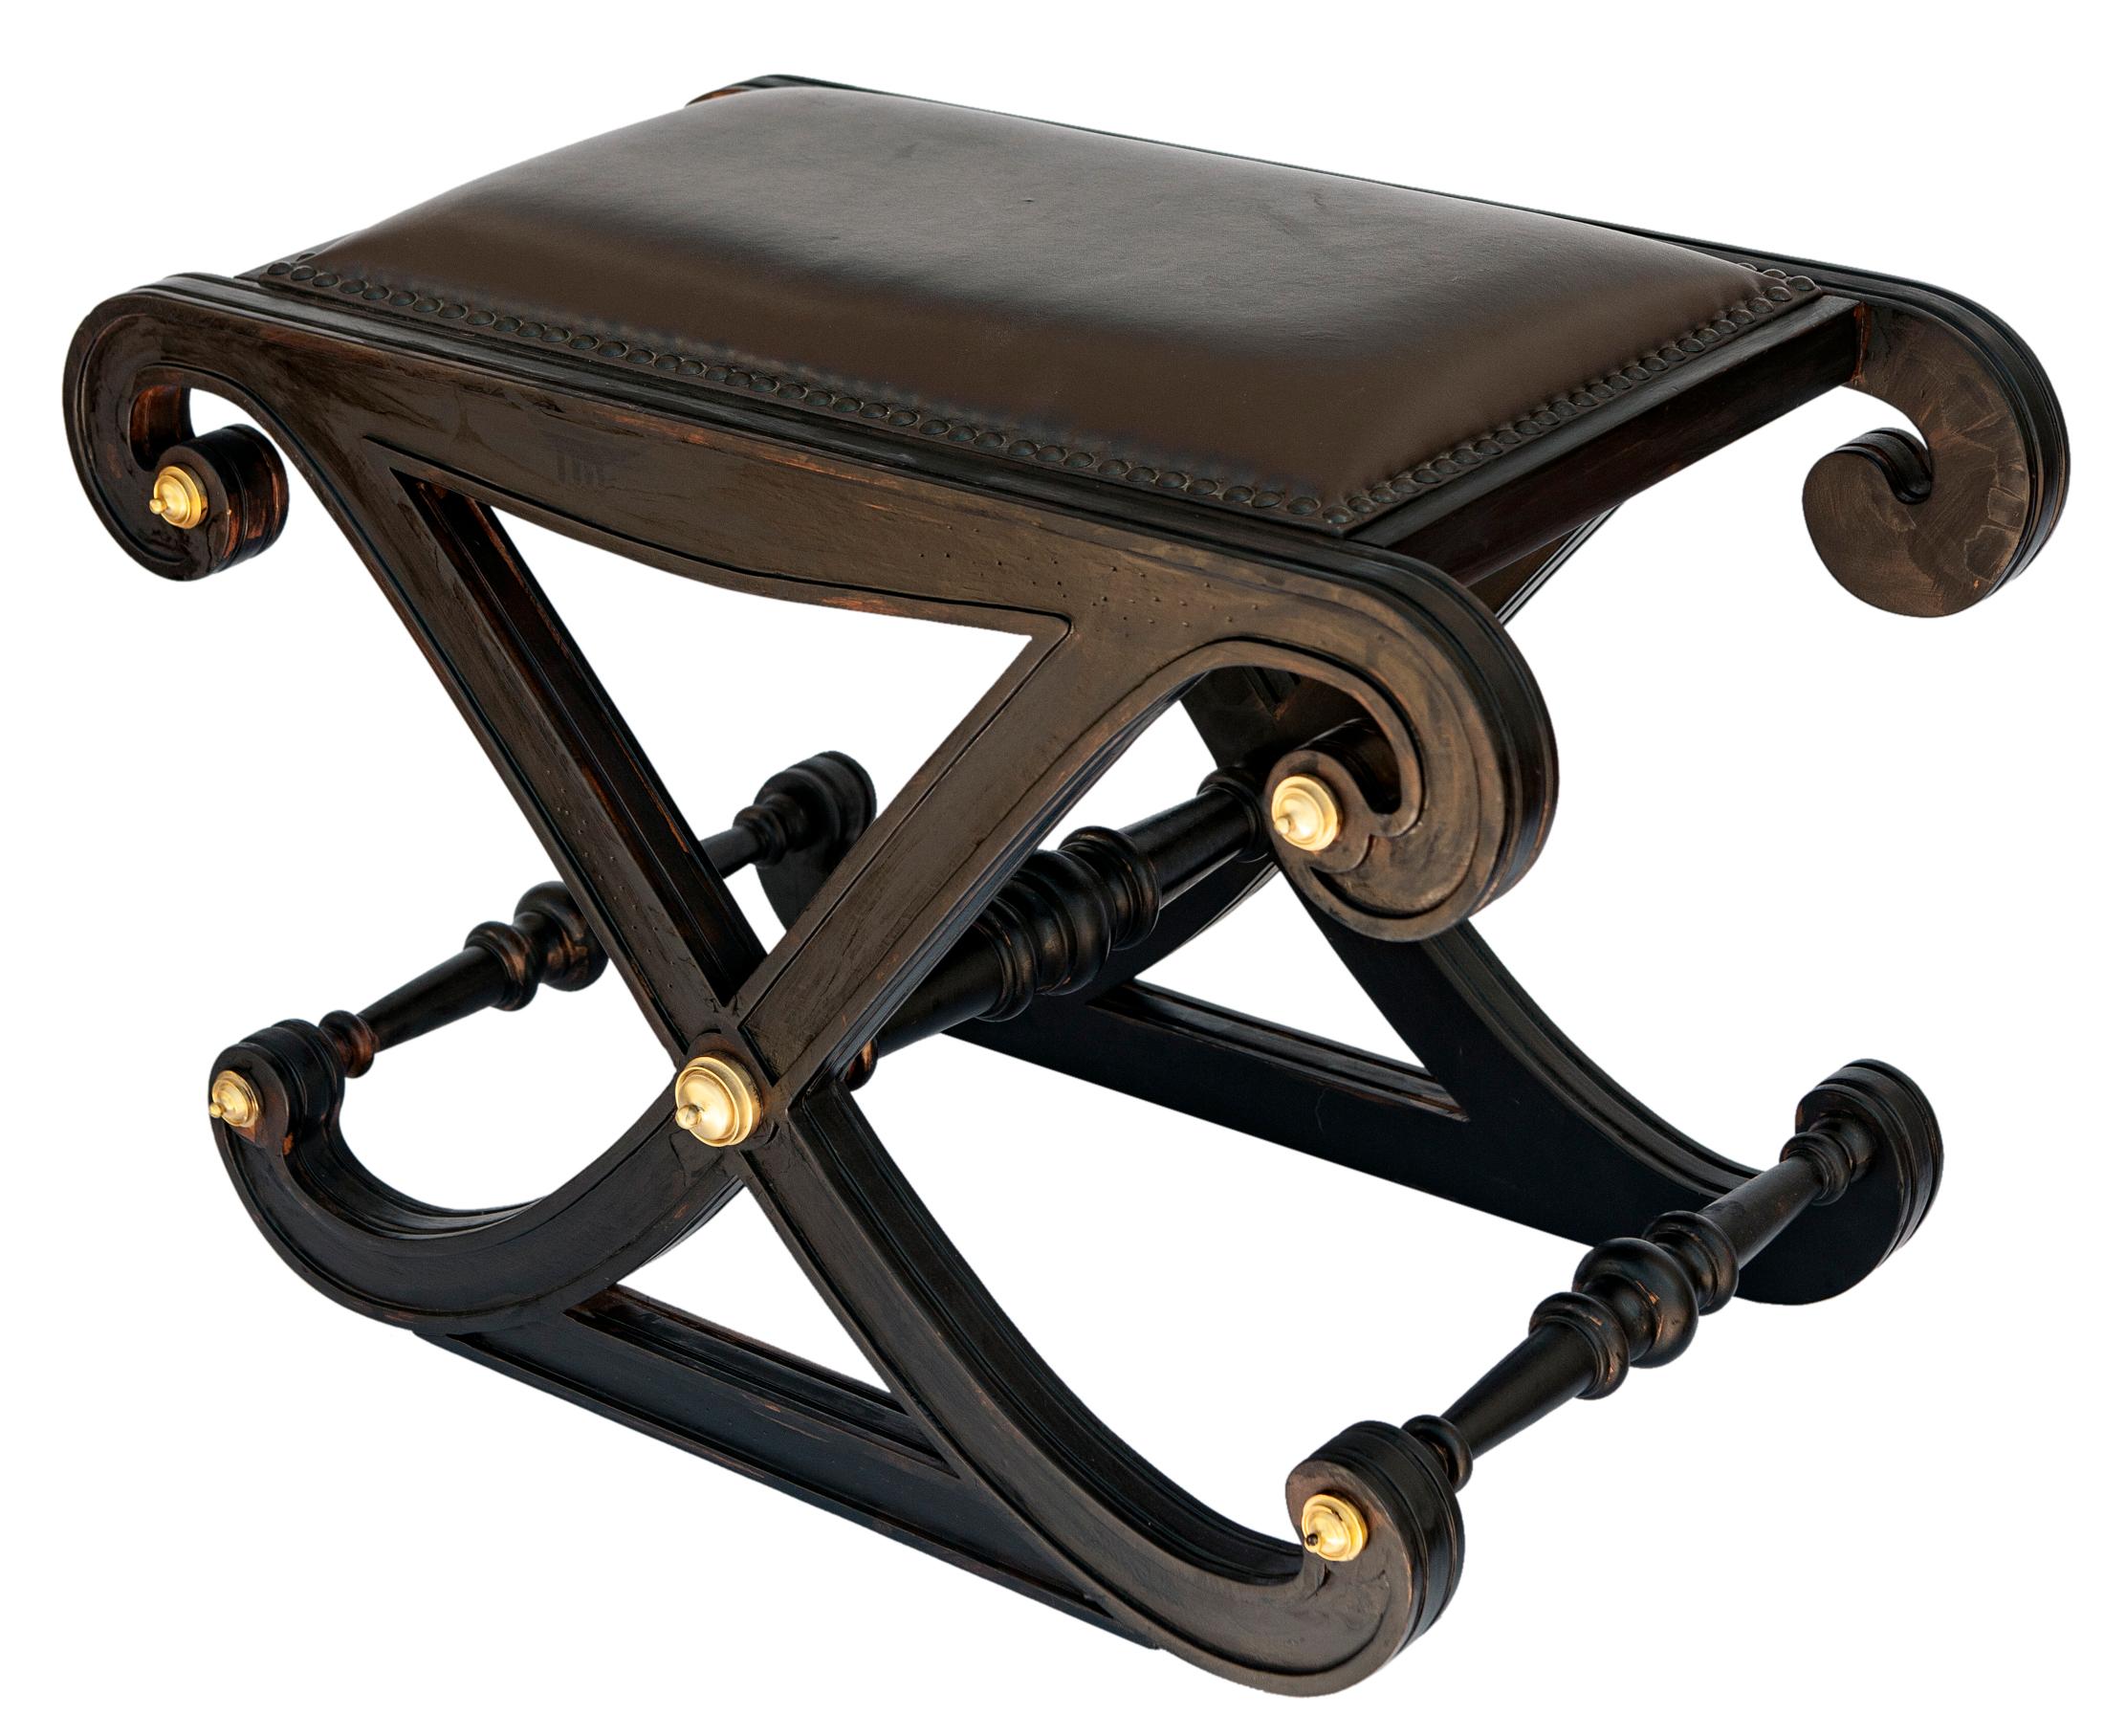 Regency style ebonized X frame stool with satin brass accents in the style of Gillows.

